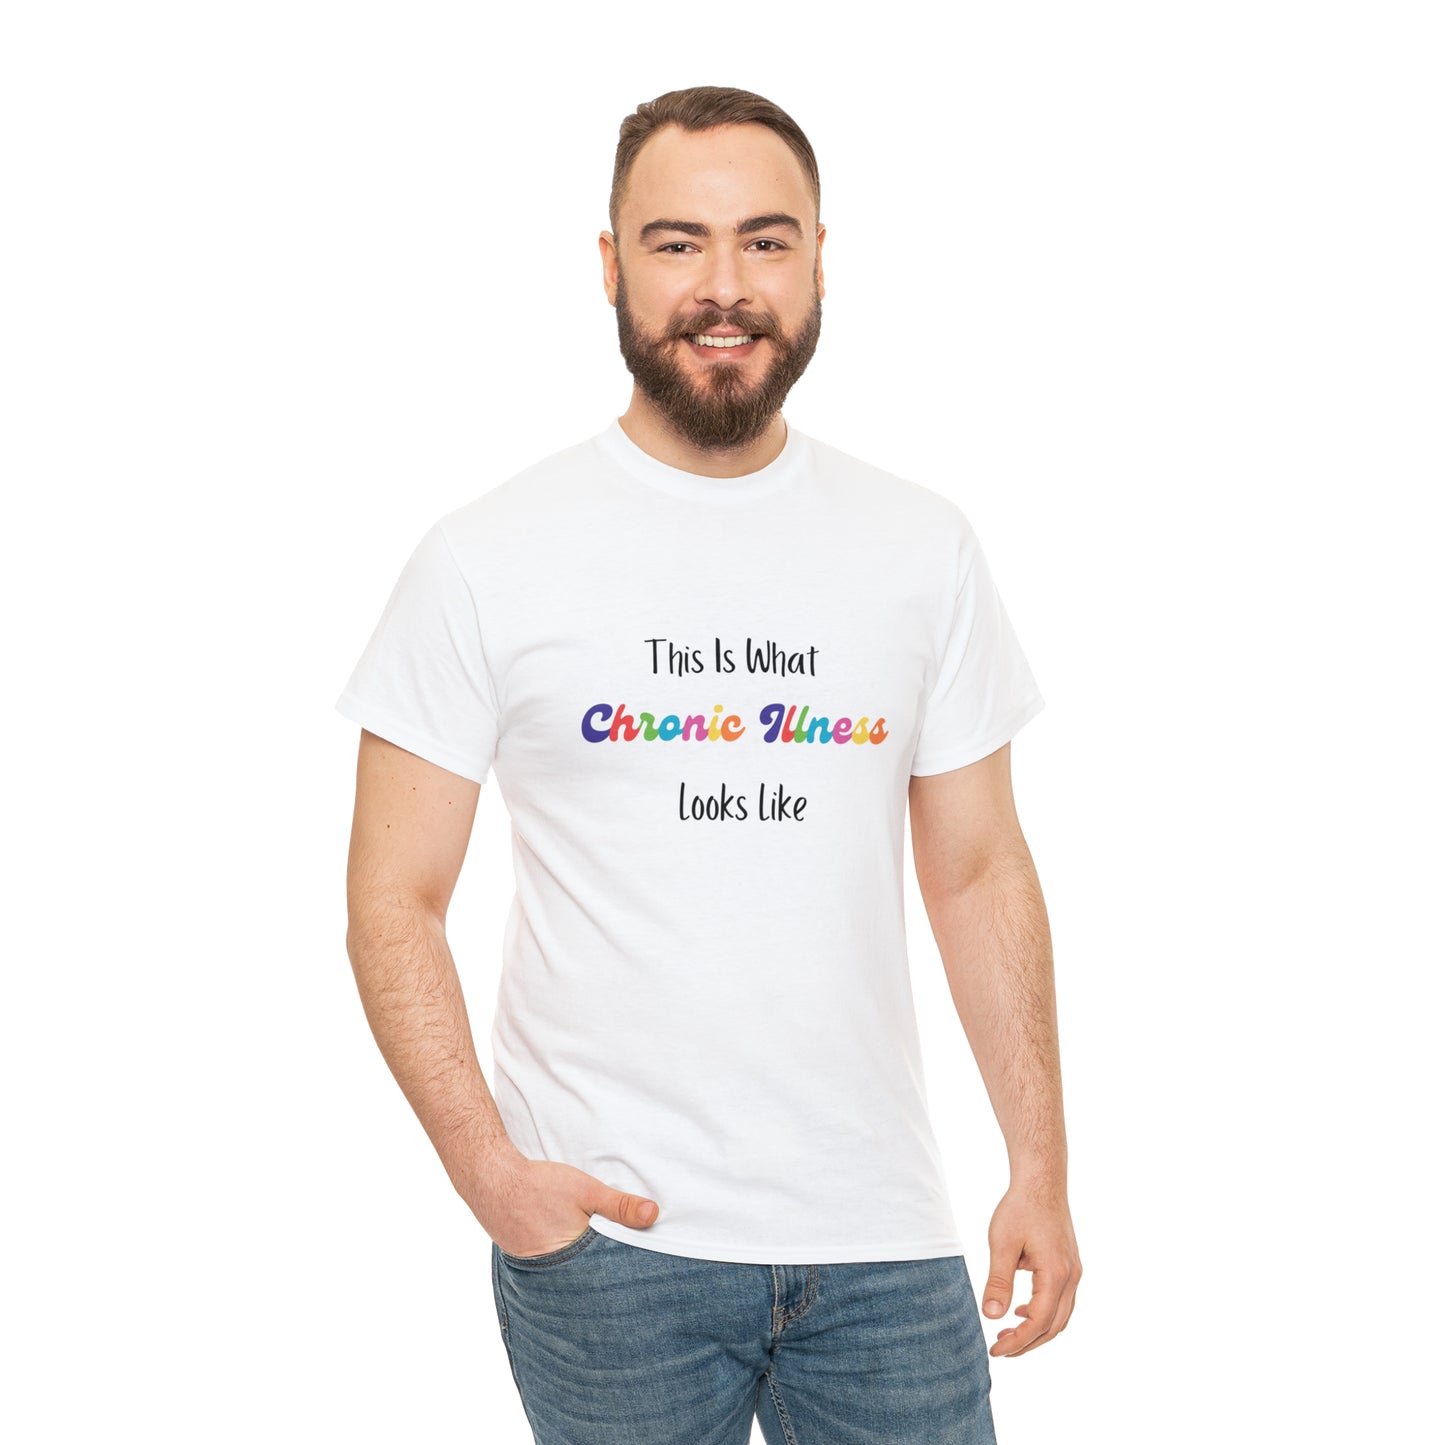 This Is What Chronic Illness Looks Like T-shirt